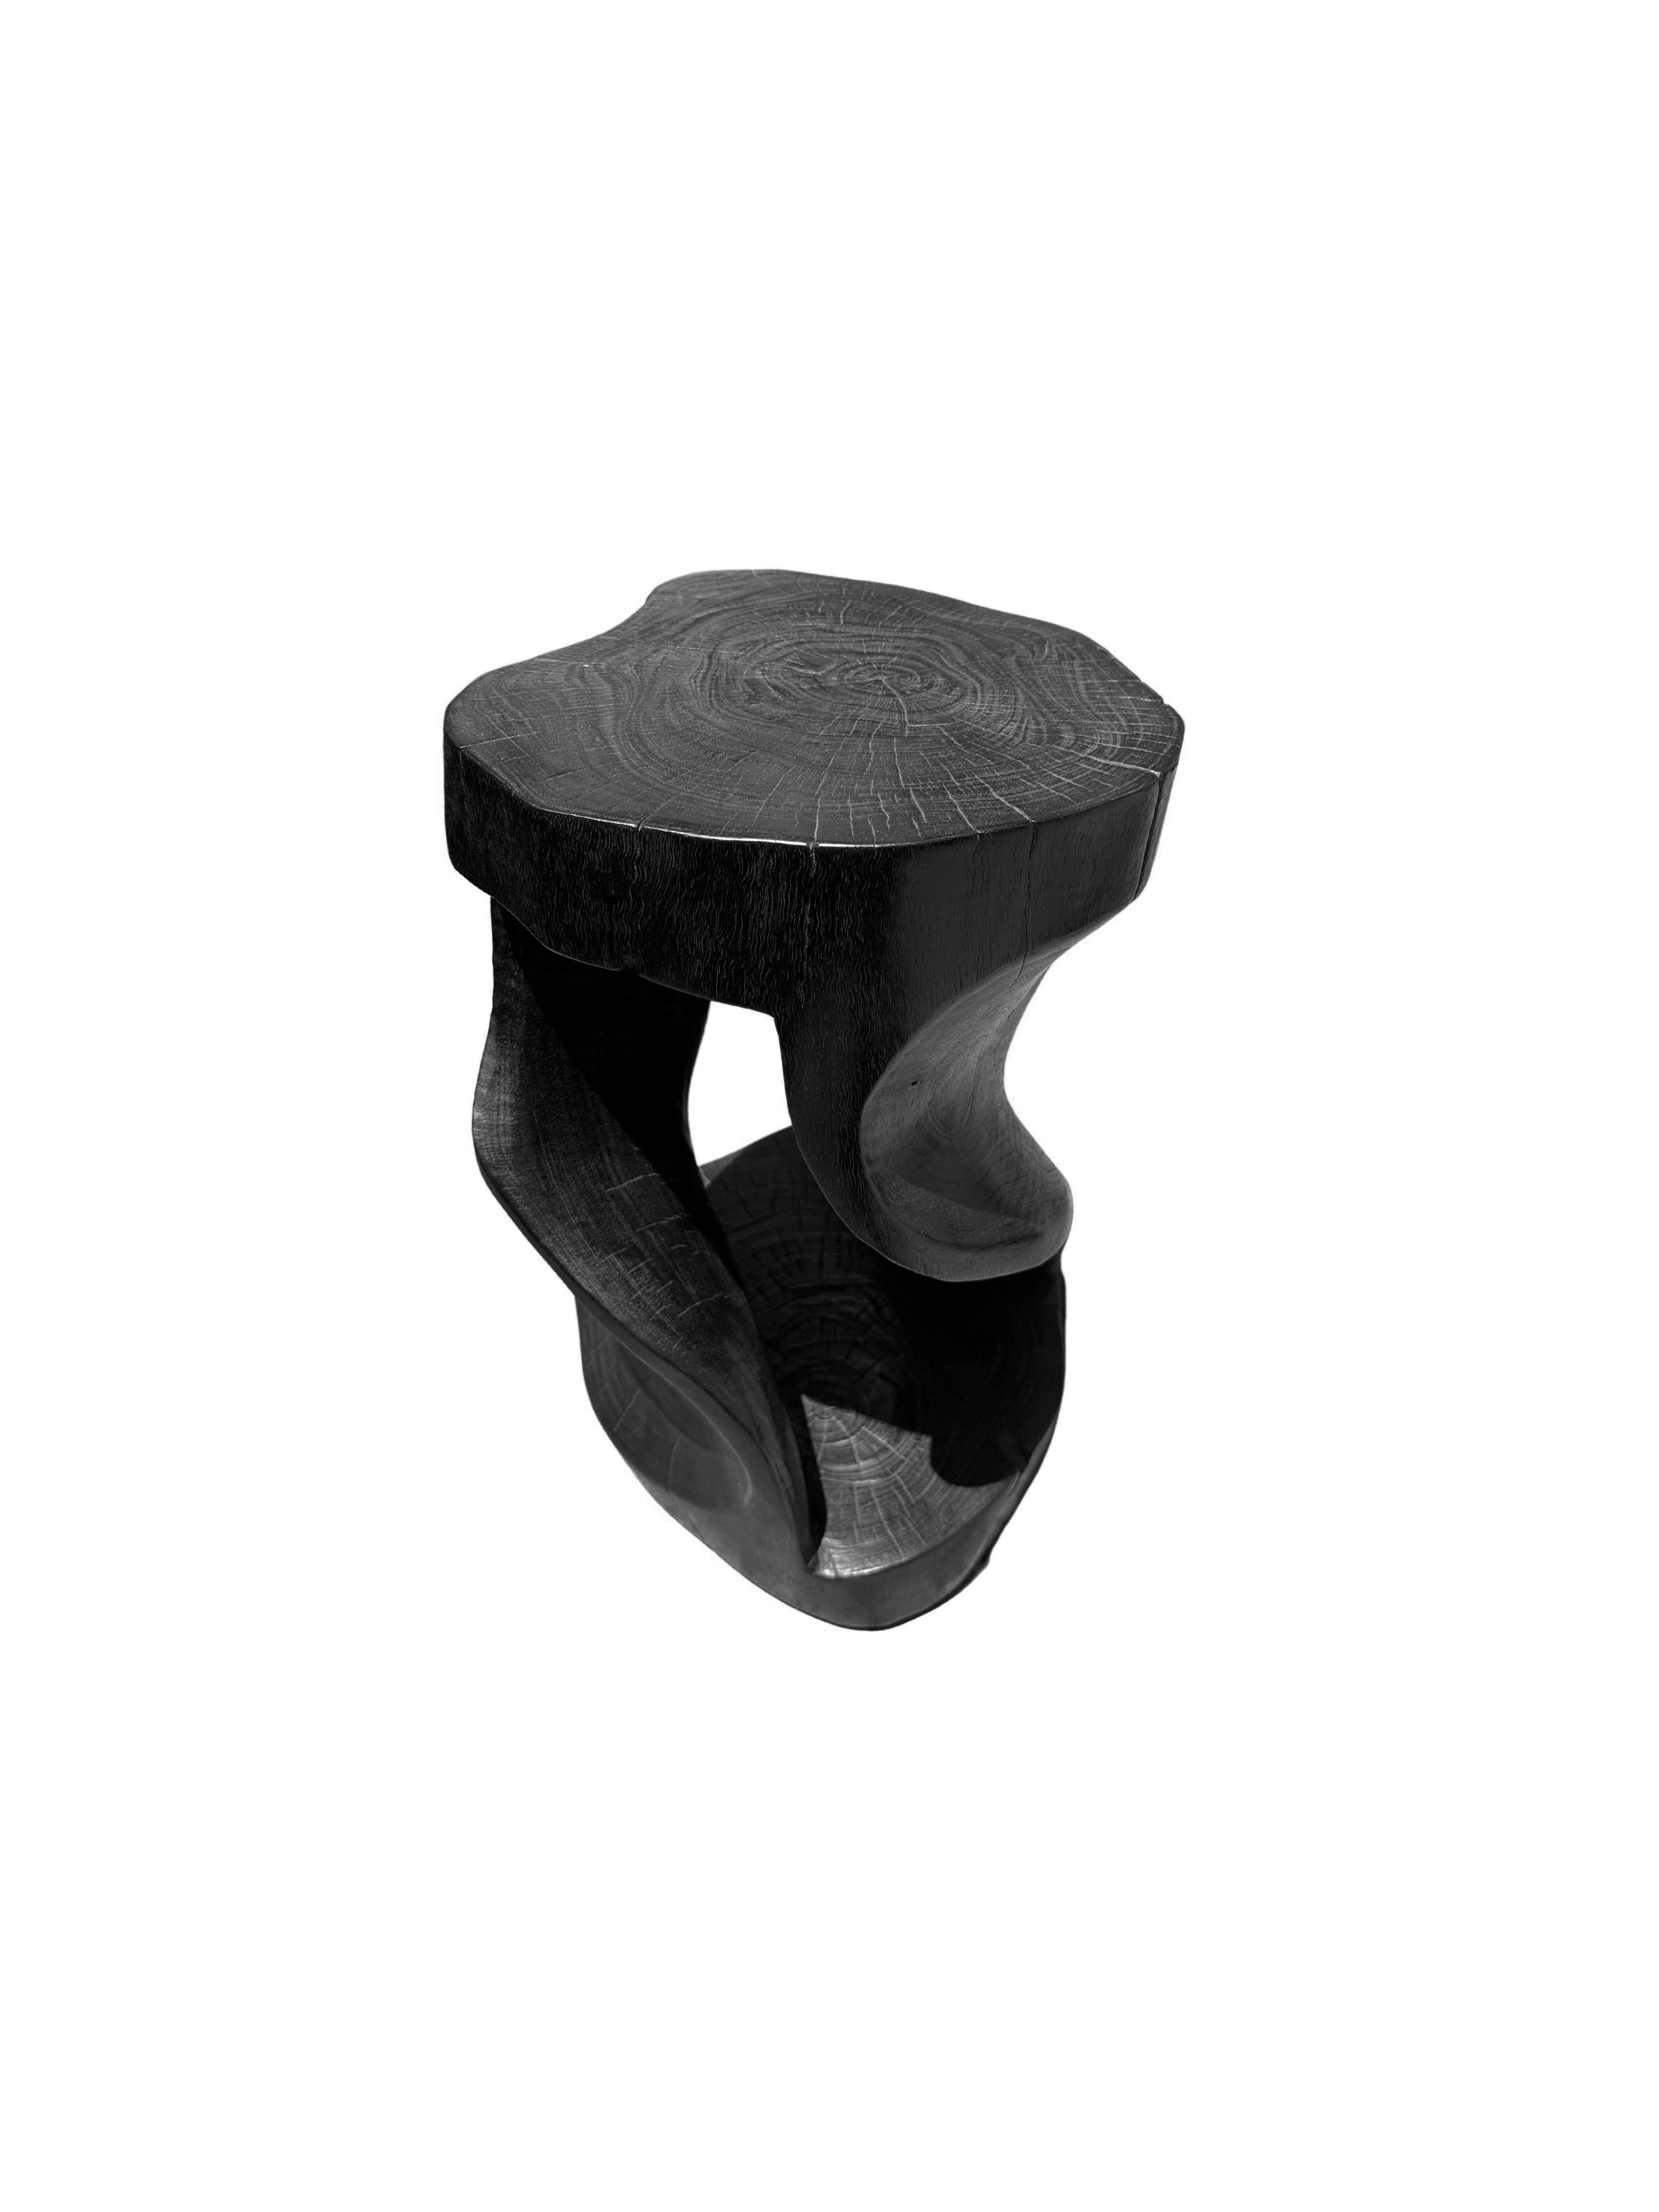 Organic Modern Sculptural Stool / Side Table Carved from Solid Mango Wood Modern Organic For Sale